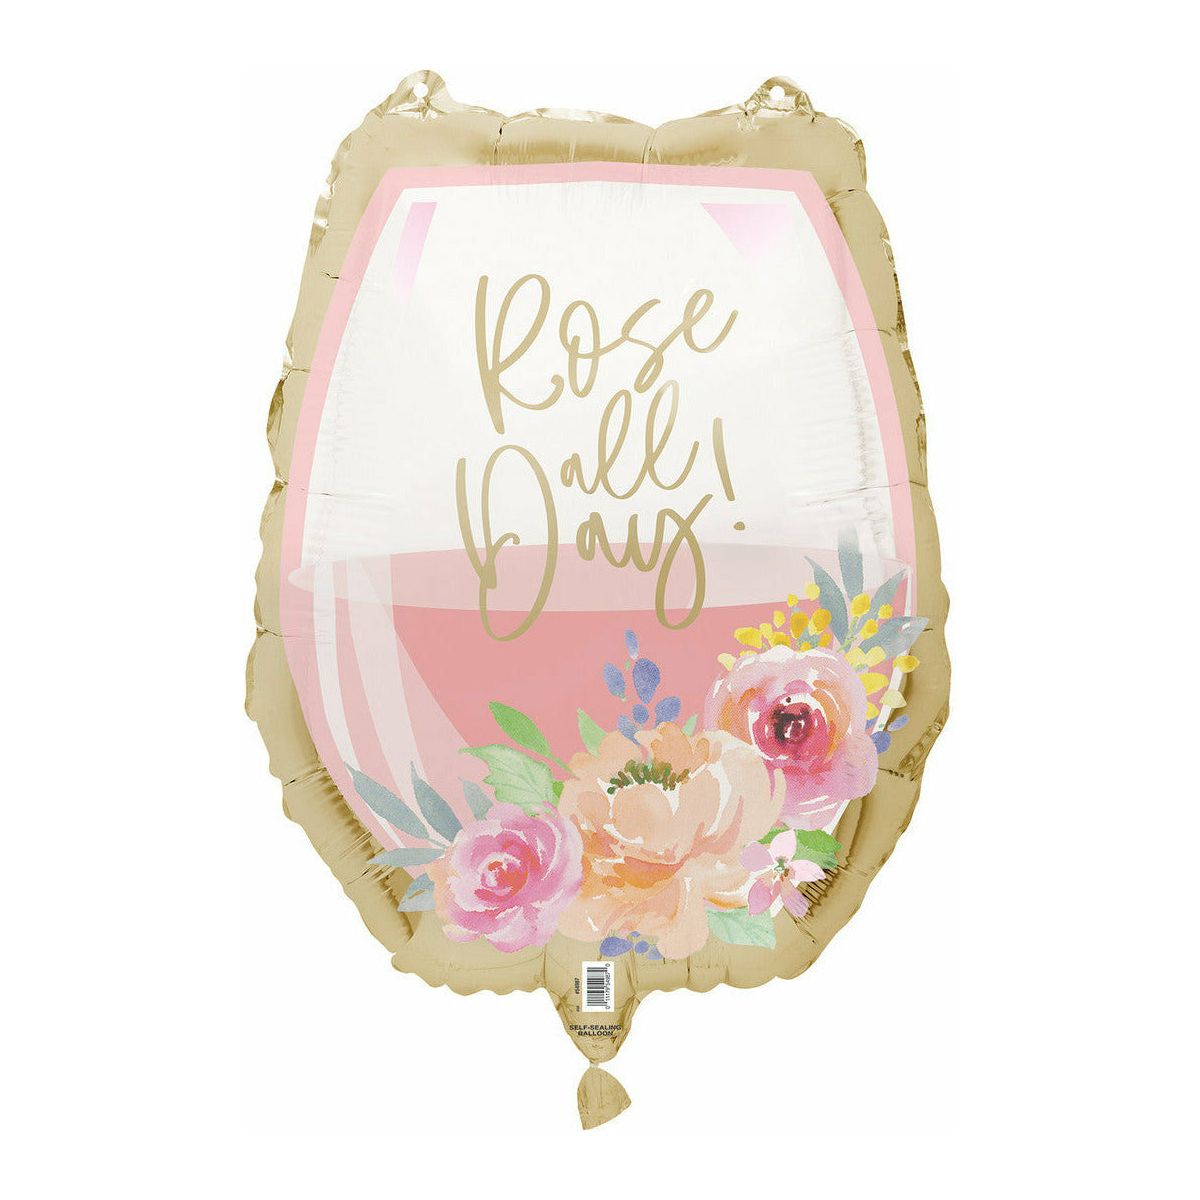 Ros̬ All Day Glass Foil Balloon - 43cm 1 Piece - Dollars and Sense